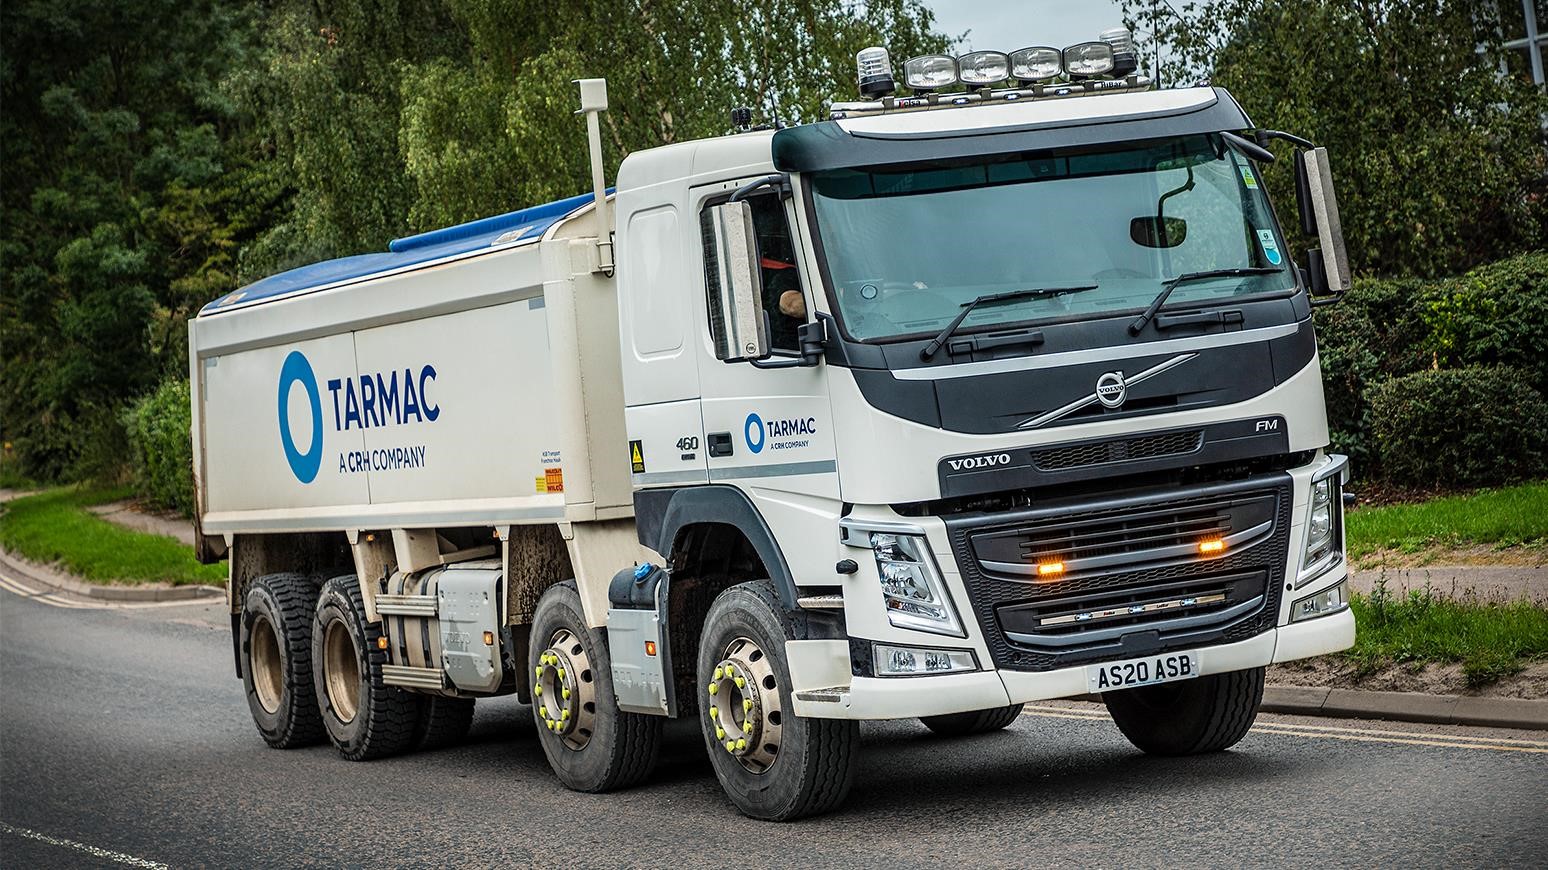 Nuneaton-Based Aggregate & Asphalt Transporter Adds Two New FM Tipper Trucks To Its Volvo-Dominated Fleet